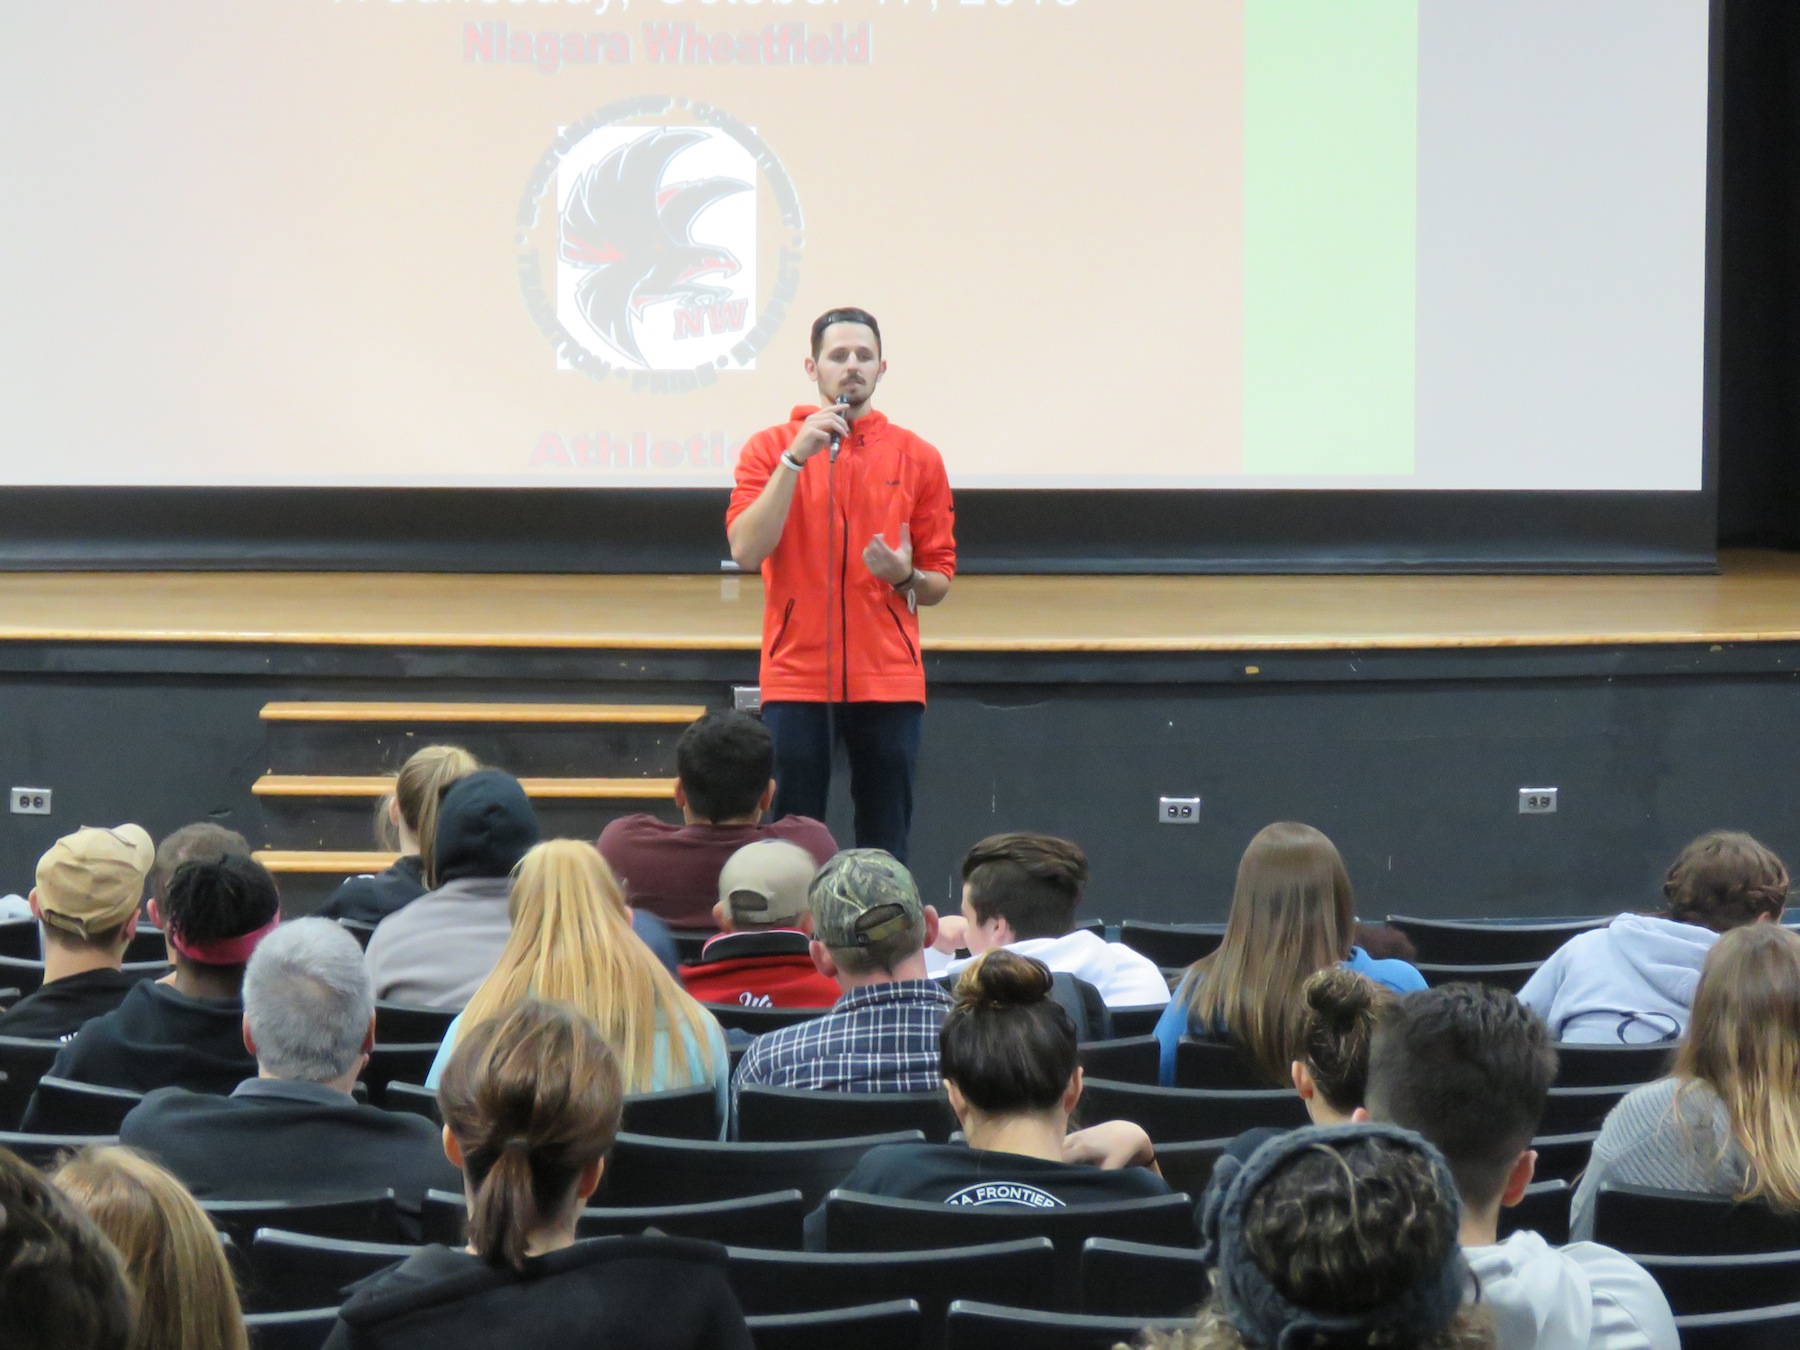 Grand Island High School and University at Buffalo alumnus Alex Neutz talks to Niagara-Wheatfield students about his struggles with addiction, anxiety and depression. (Photos by David Yarger)